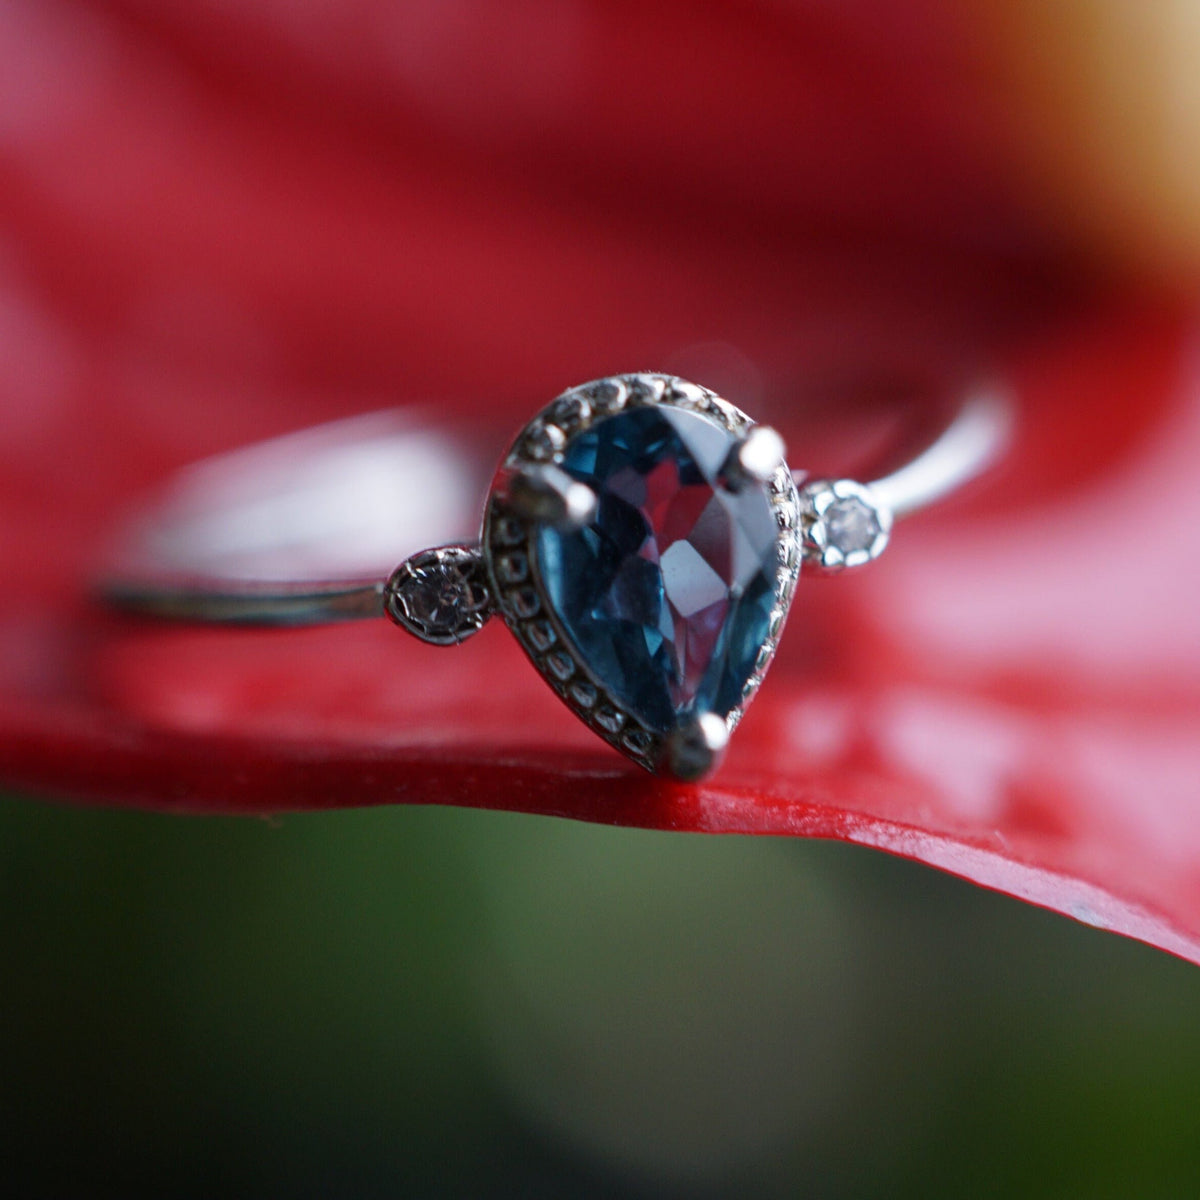 Natural Blue Topaz Ring with Cubic Zirconias